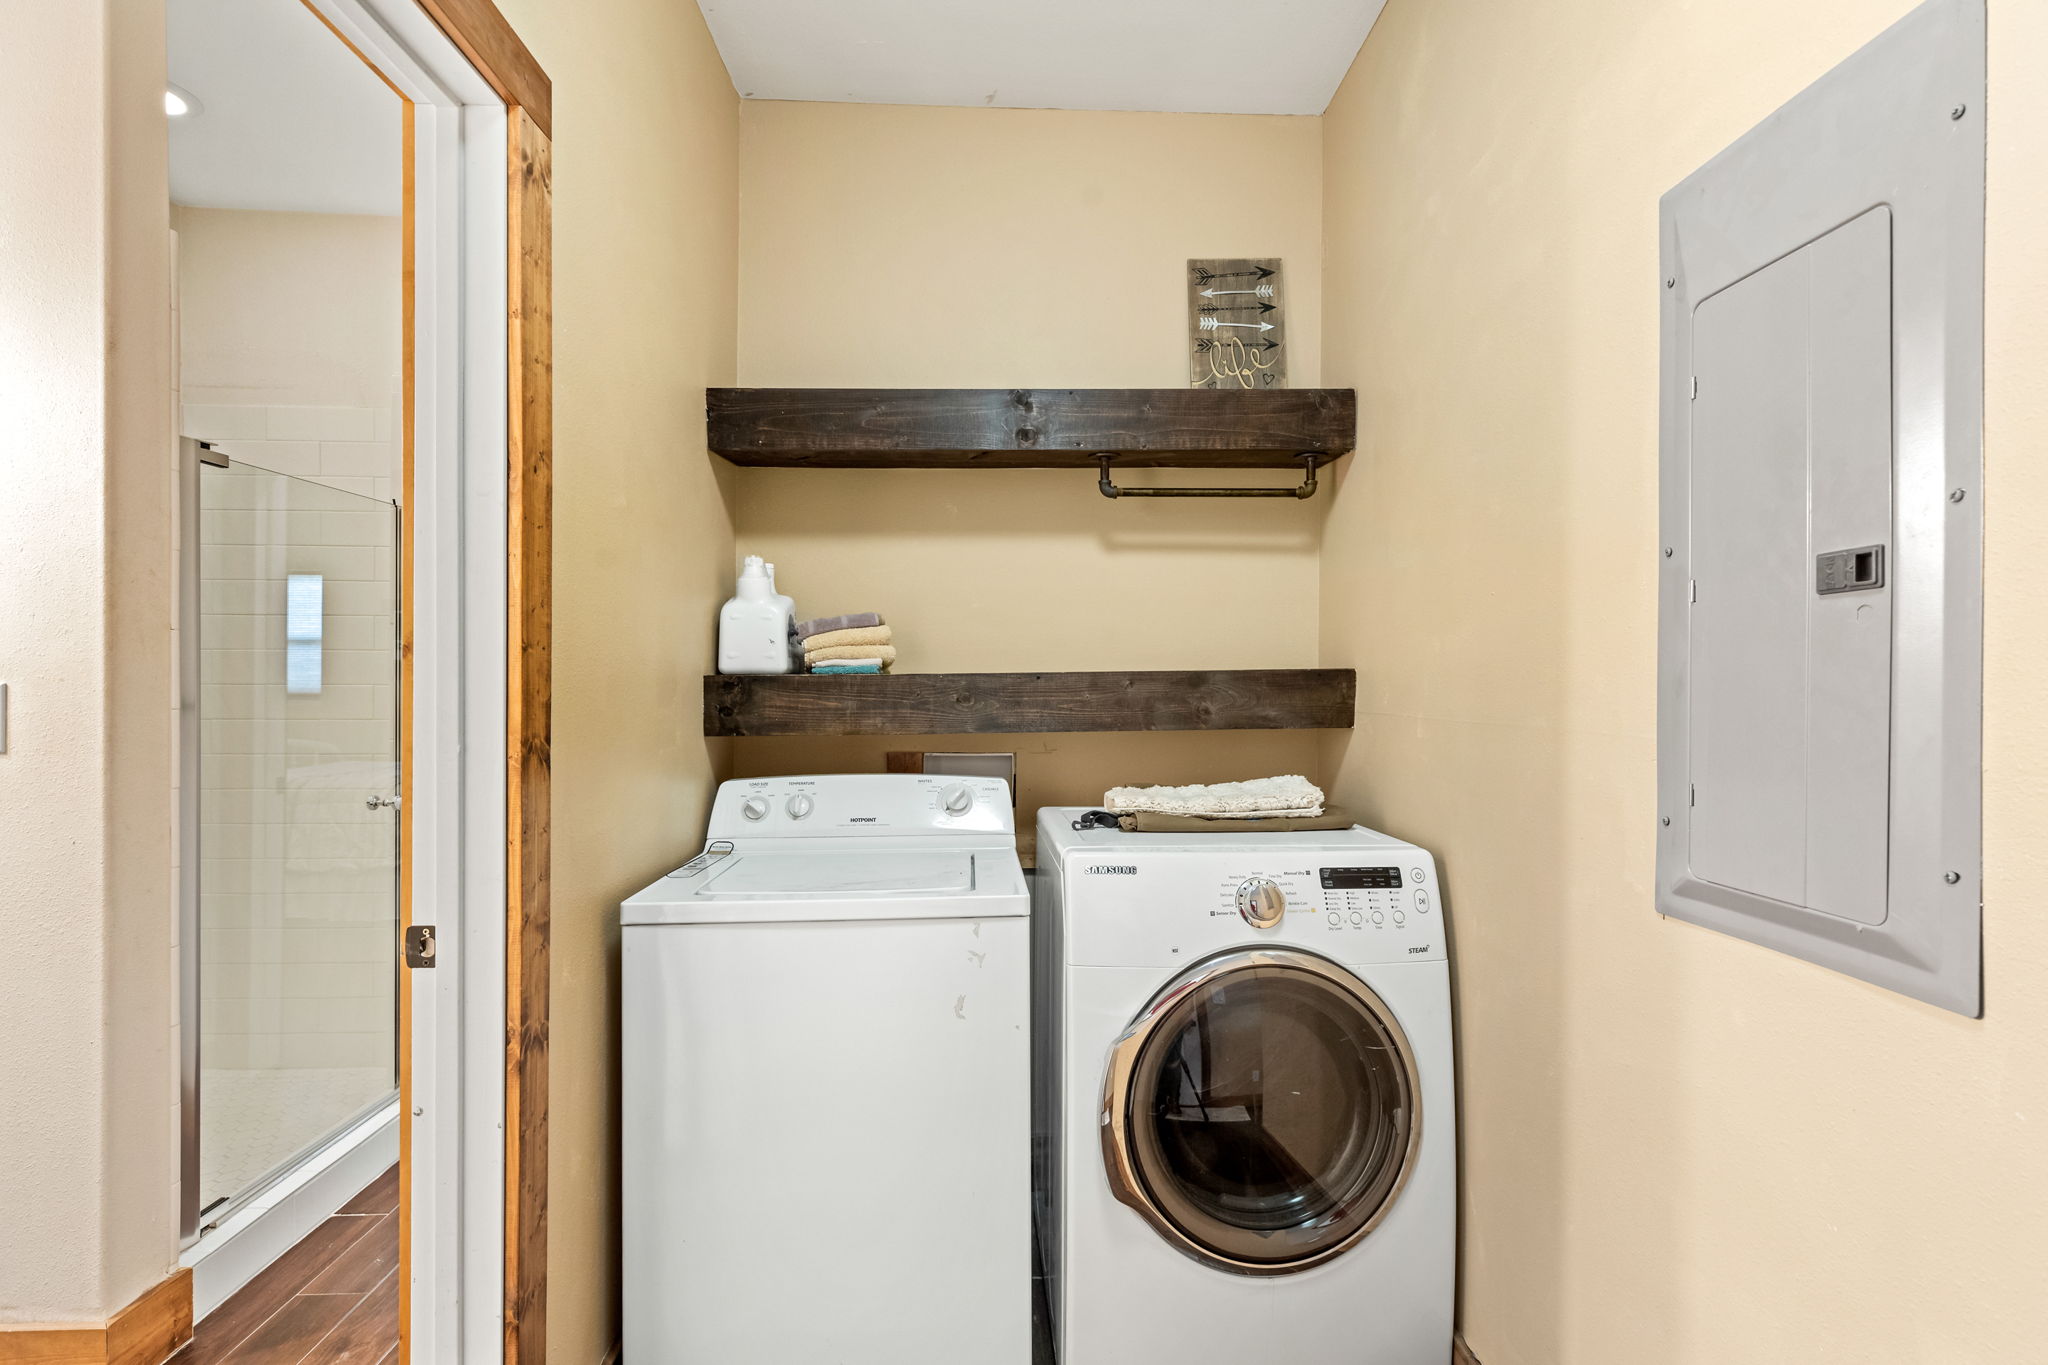 Apartment Laundry with Washer & Fryer